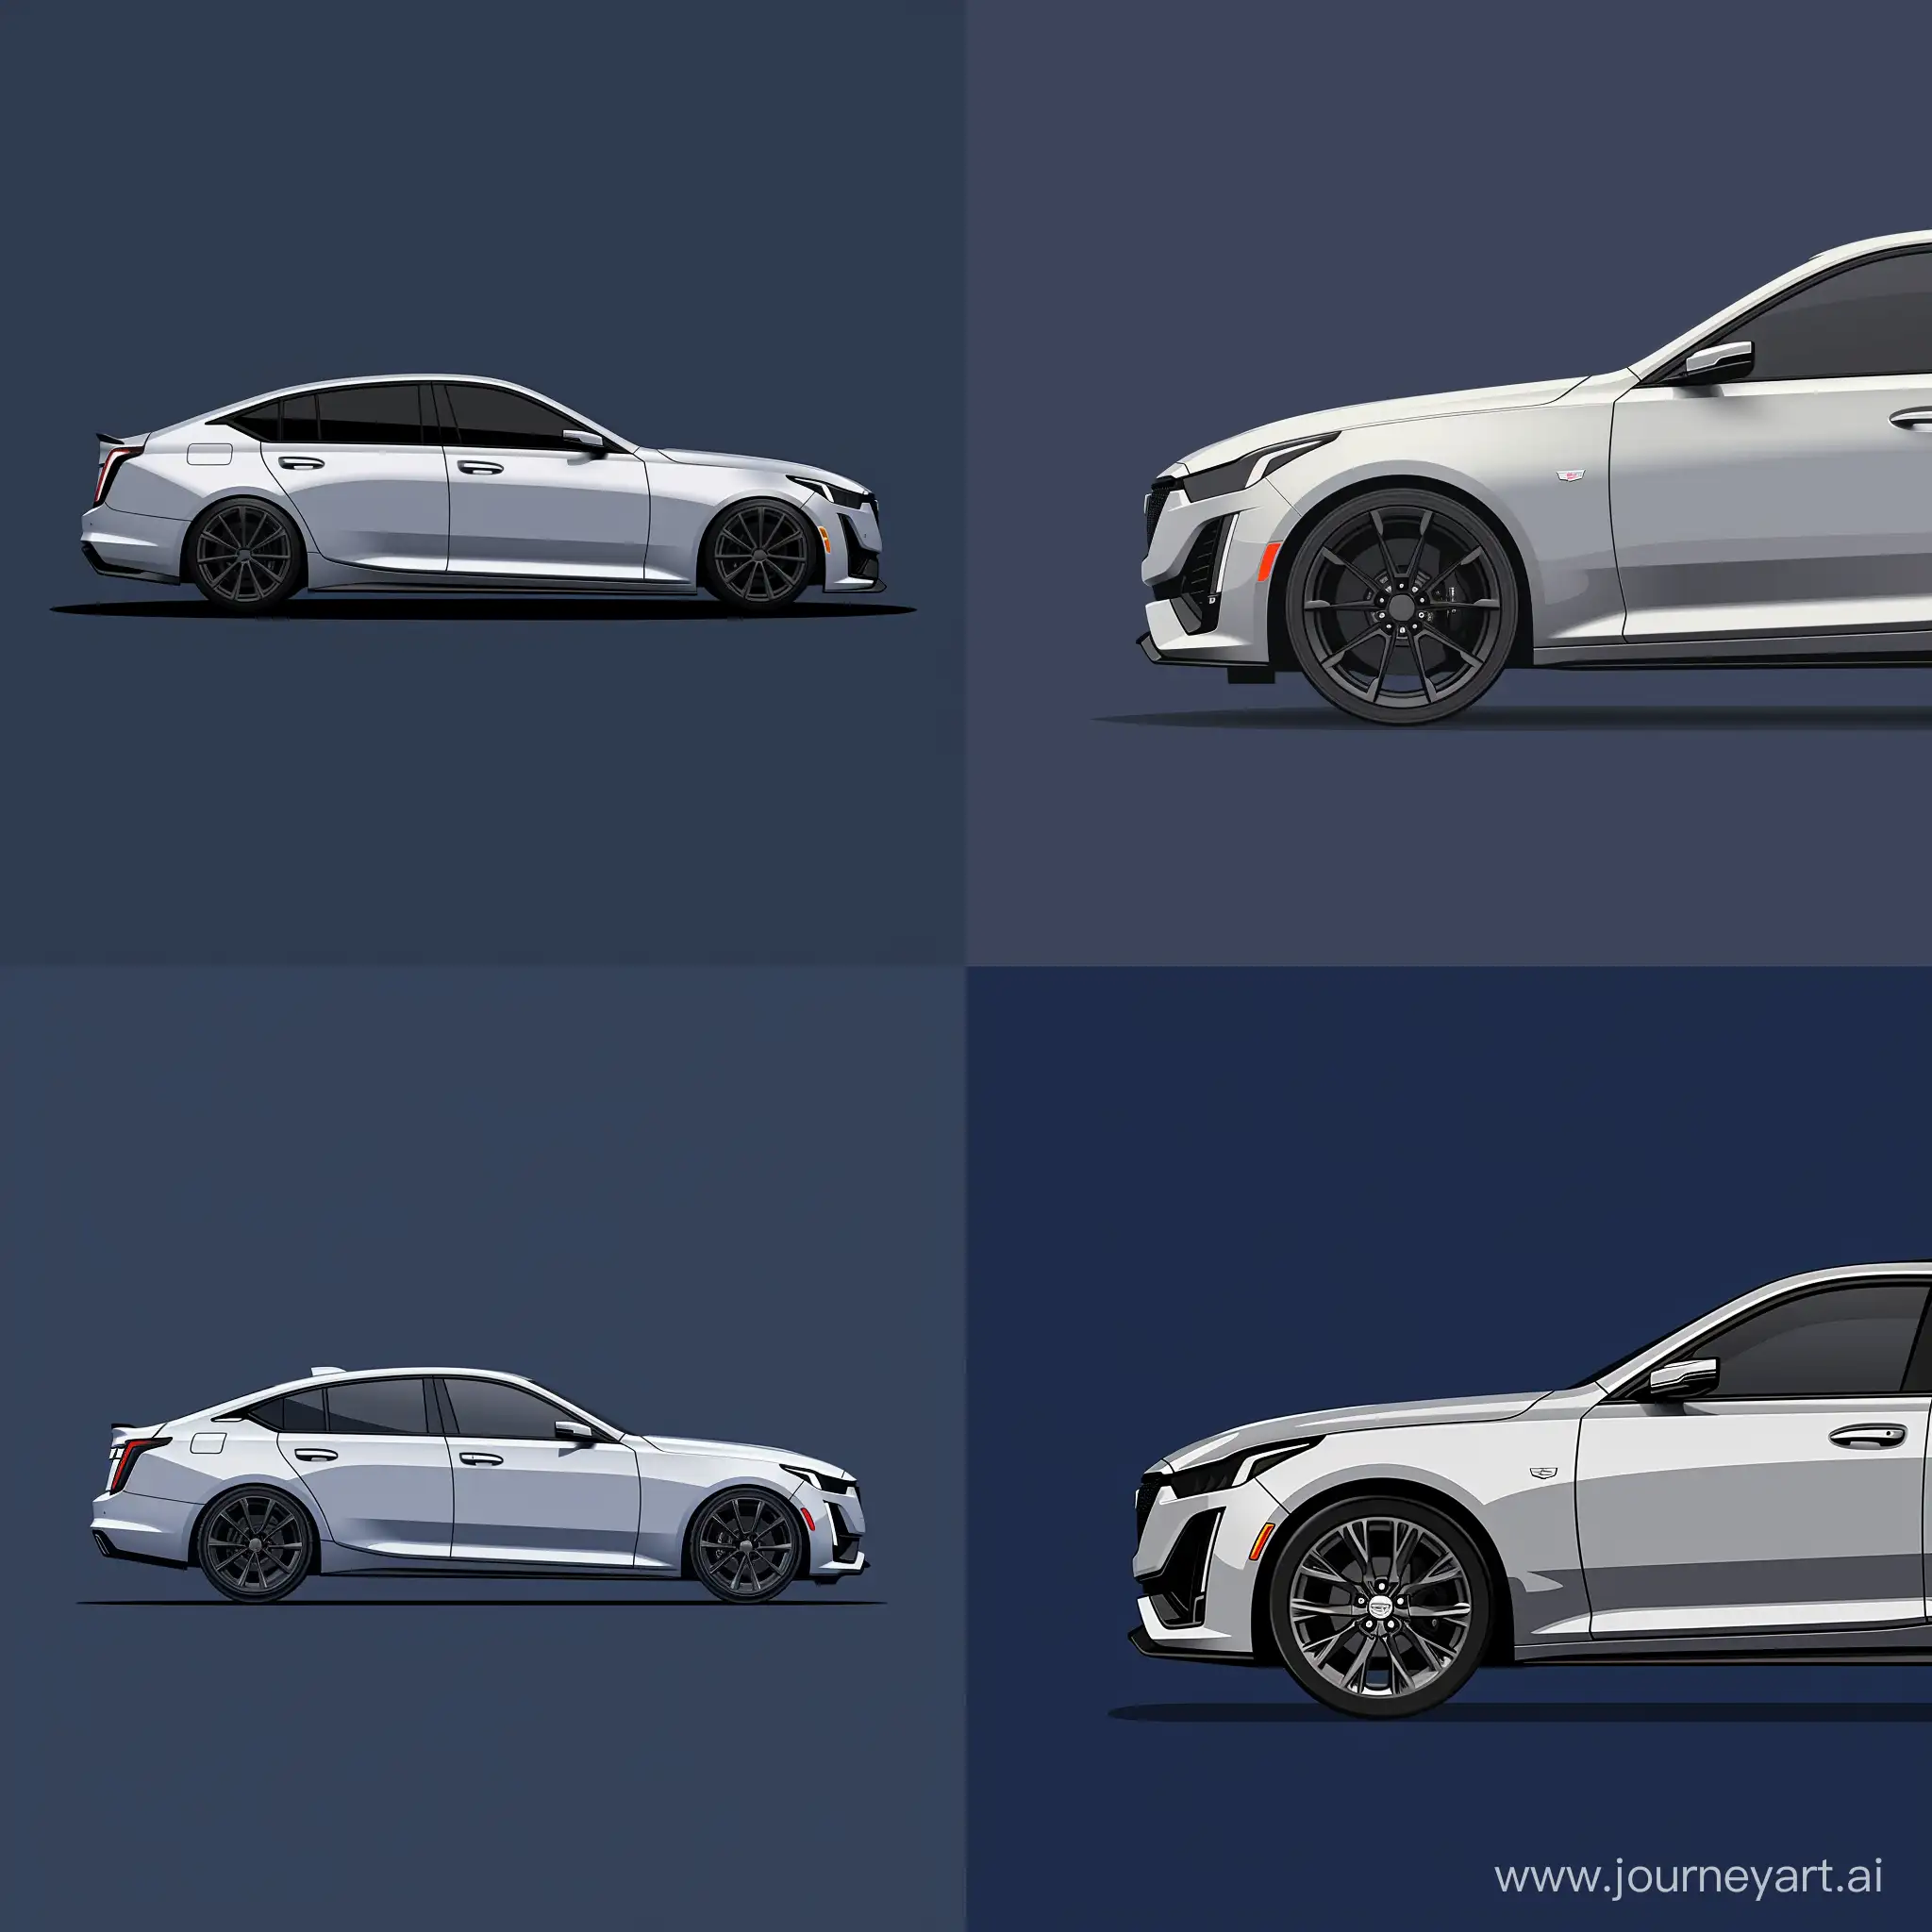 Sleek-Silver-Cadillac-CT5-Illustration-with-Black-Rims-on-Navy-Blue-Background